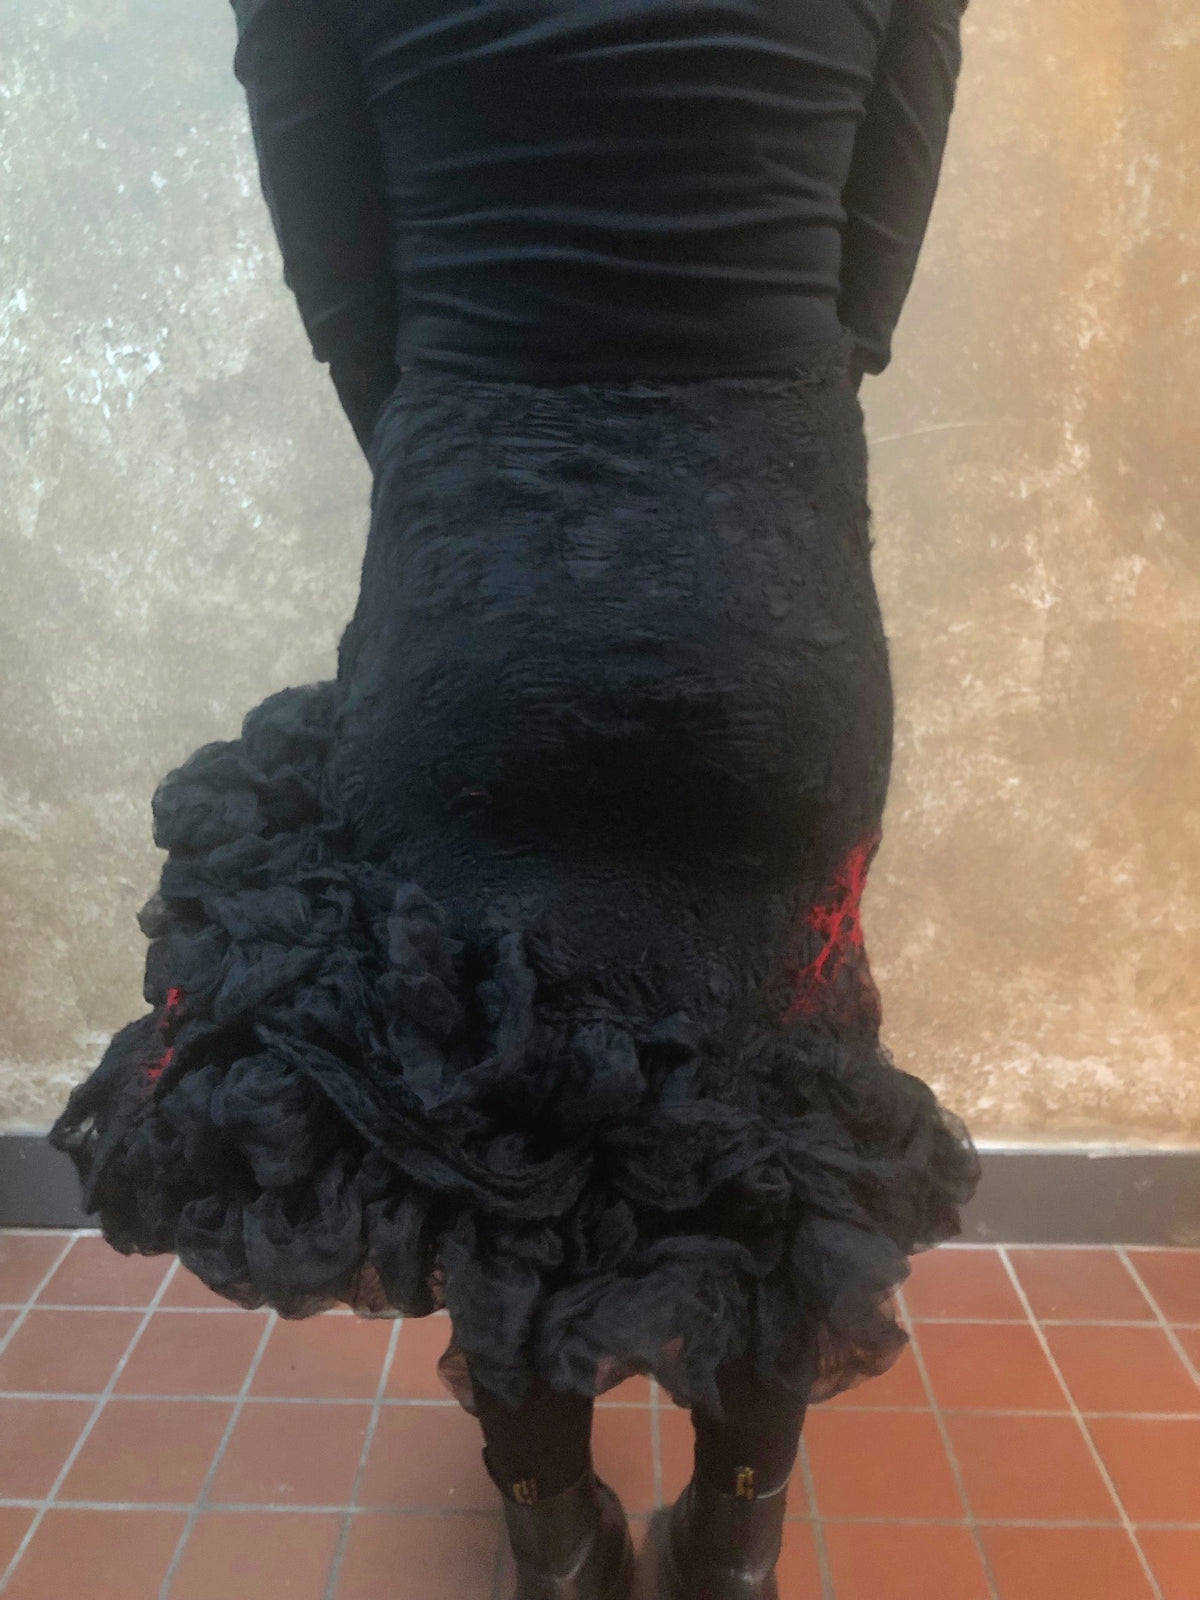 BlckBts Felted Red and Black Statement Skirt